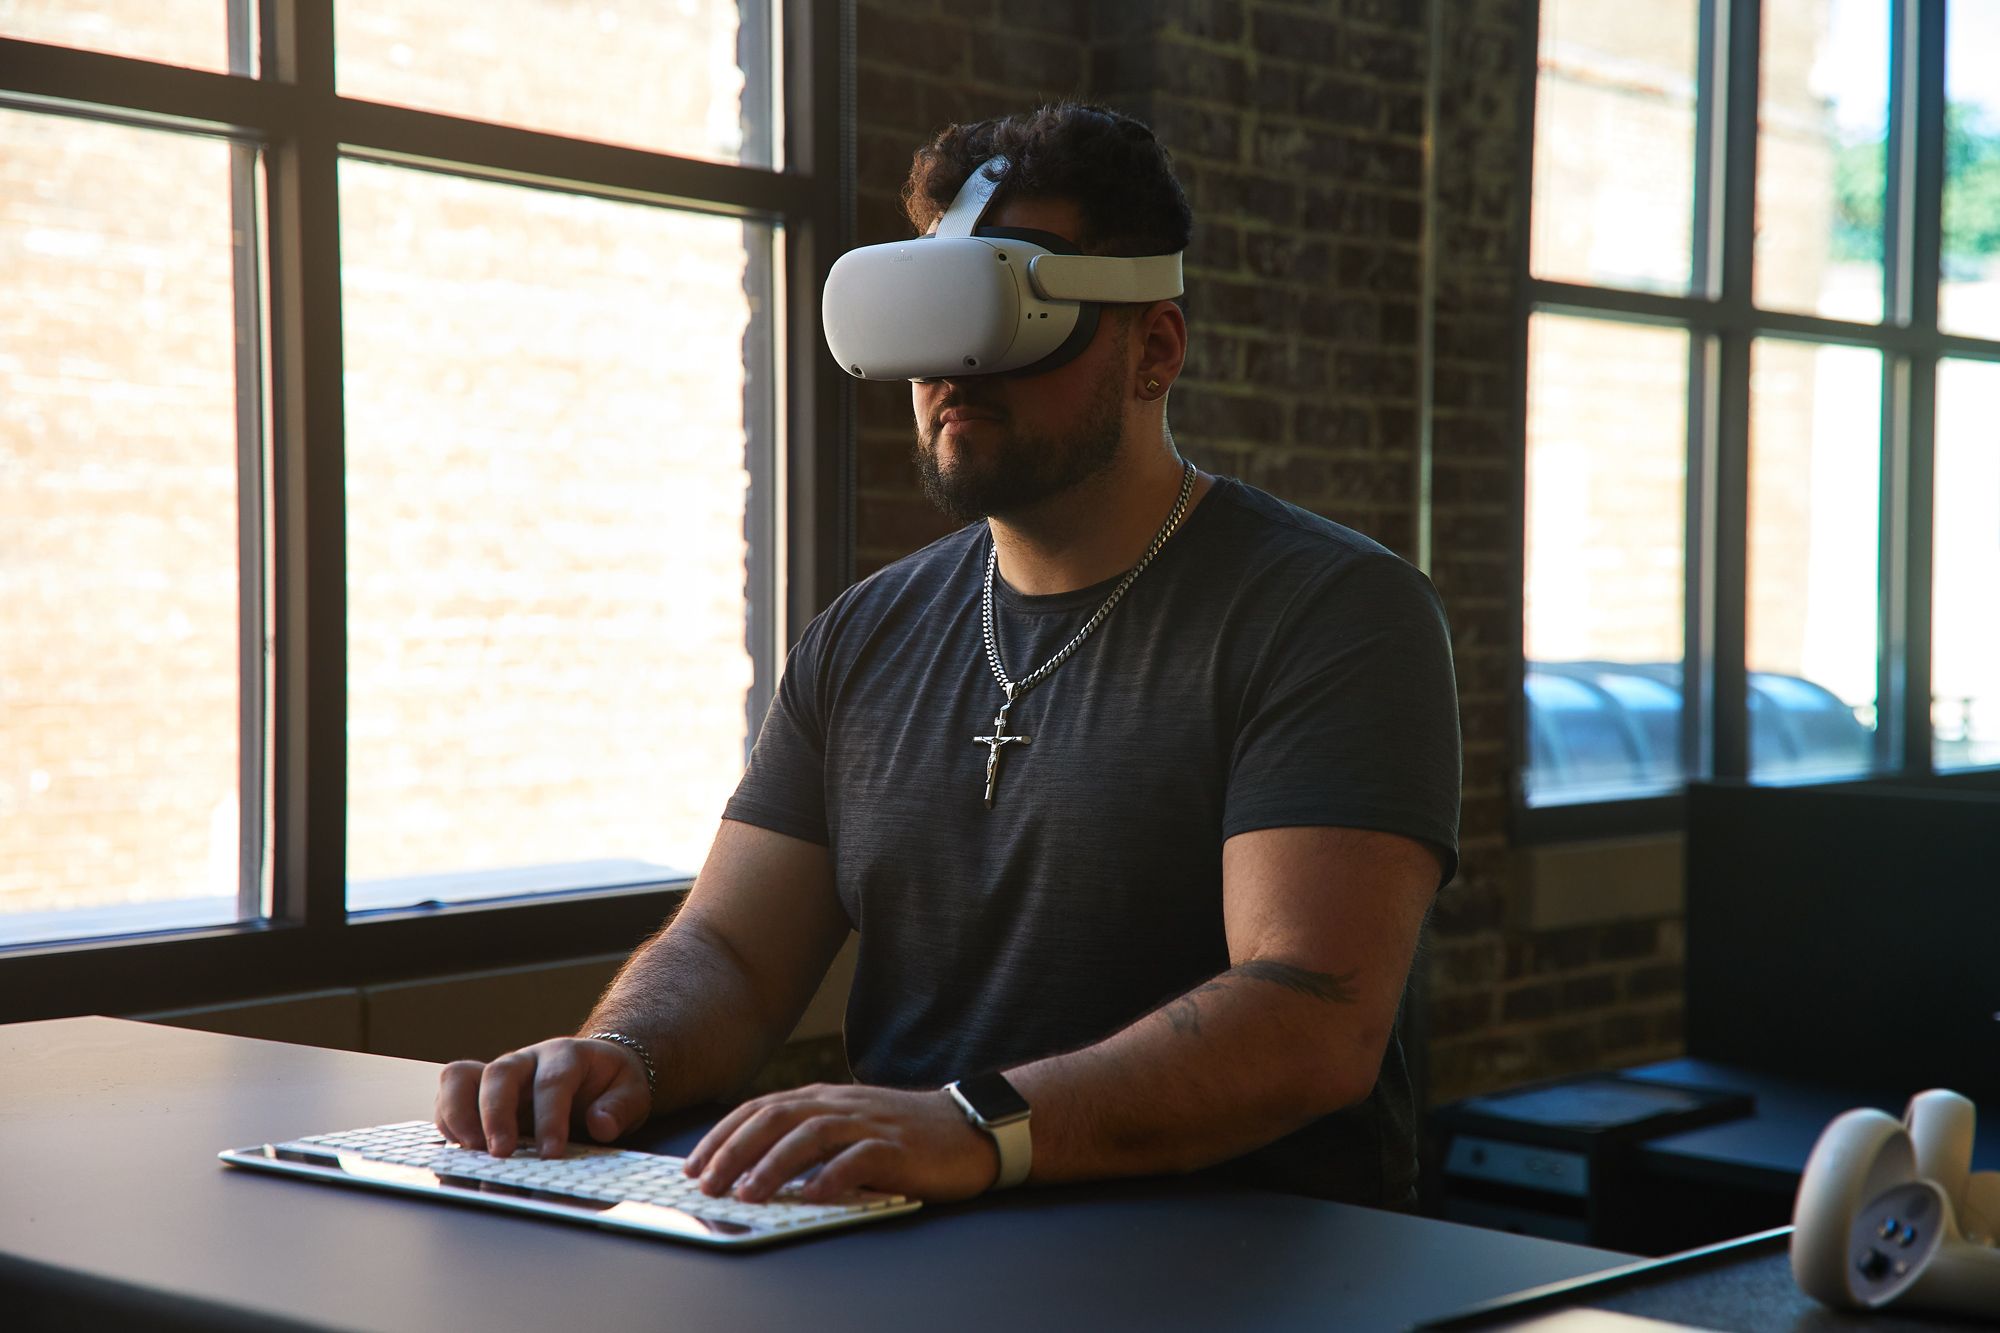 Oculus Quest 2 review - the best entry-level VR headset